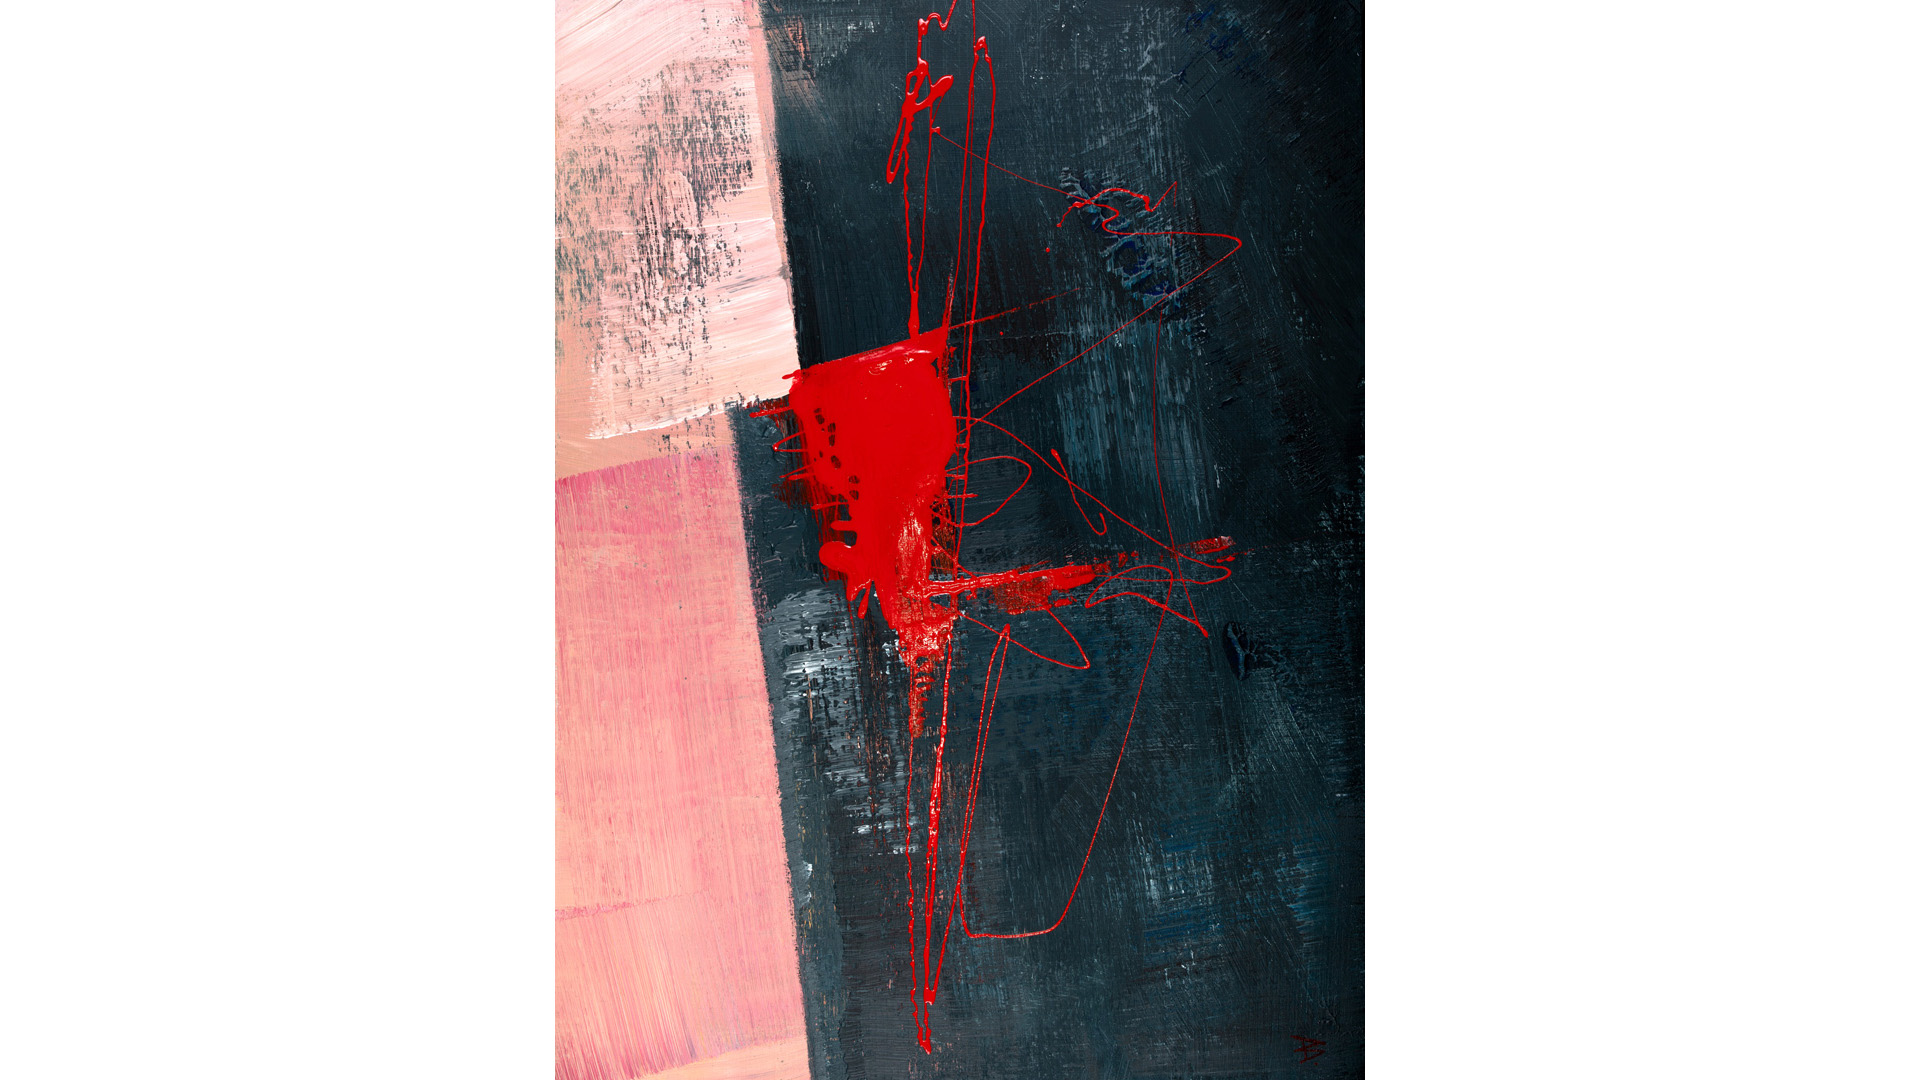 Gray_and_Red_10220_9_30x40cm, © Ernest Bisaev